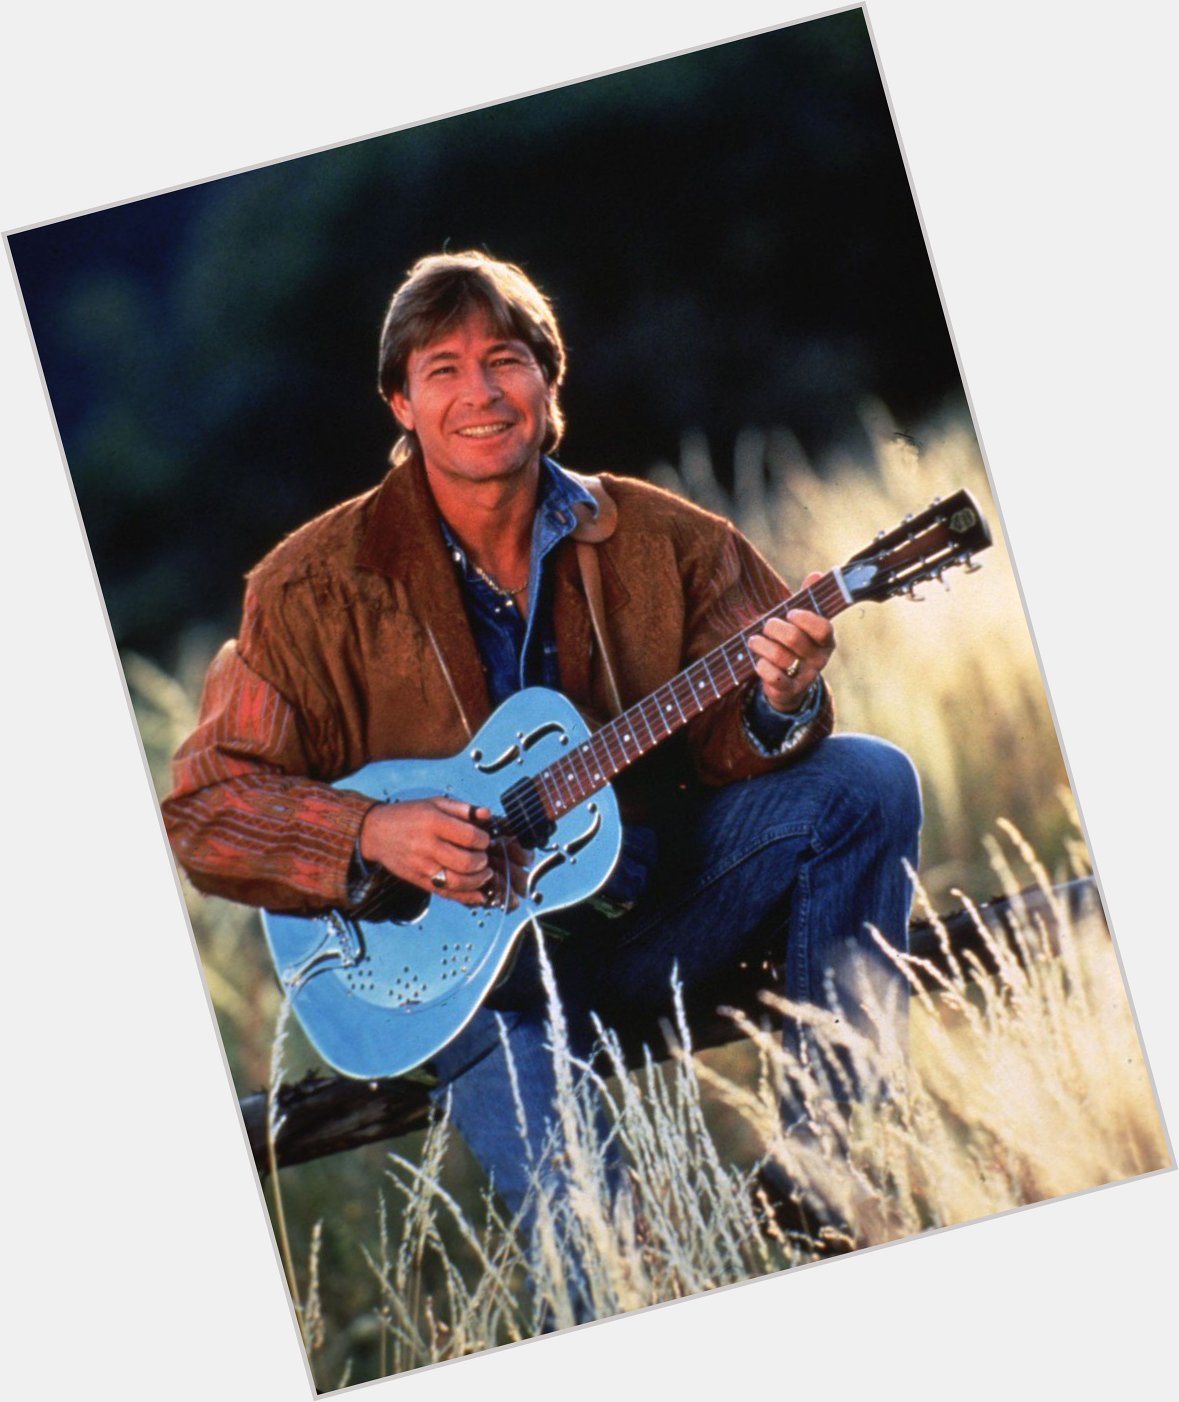 Happy Birthday to John Denver who would have turned 74 today! 